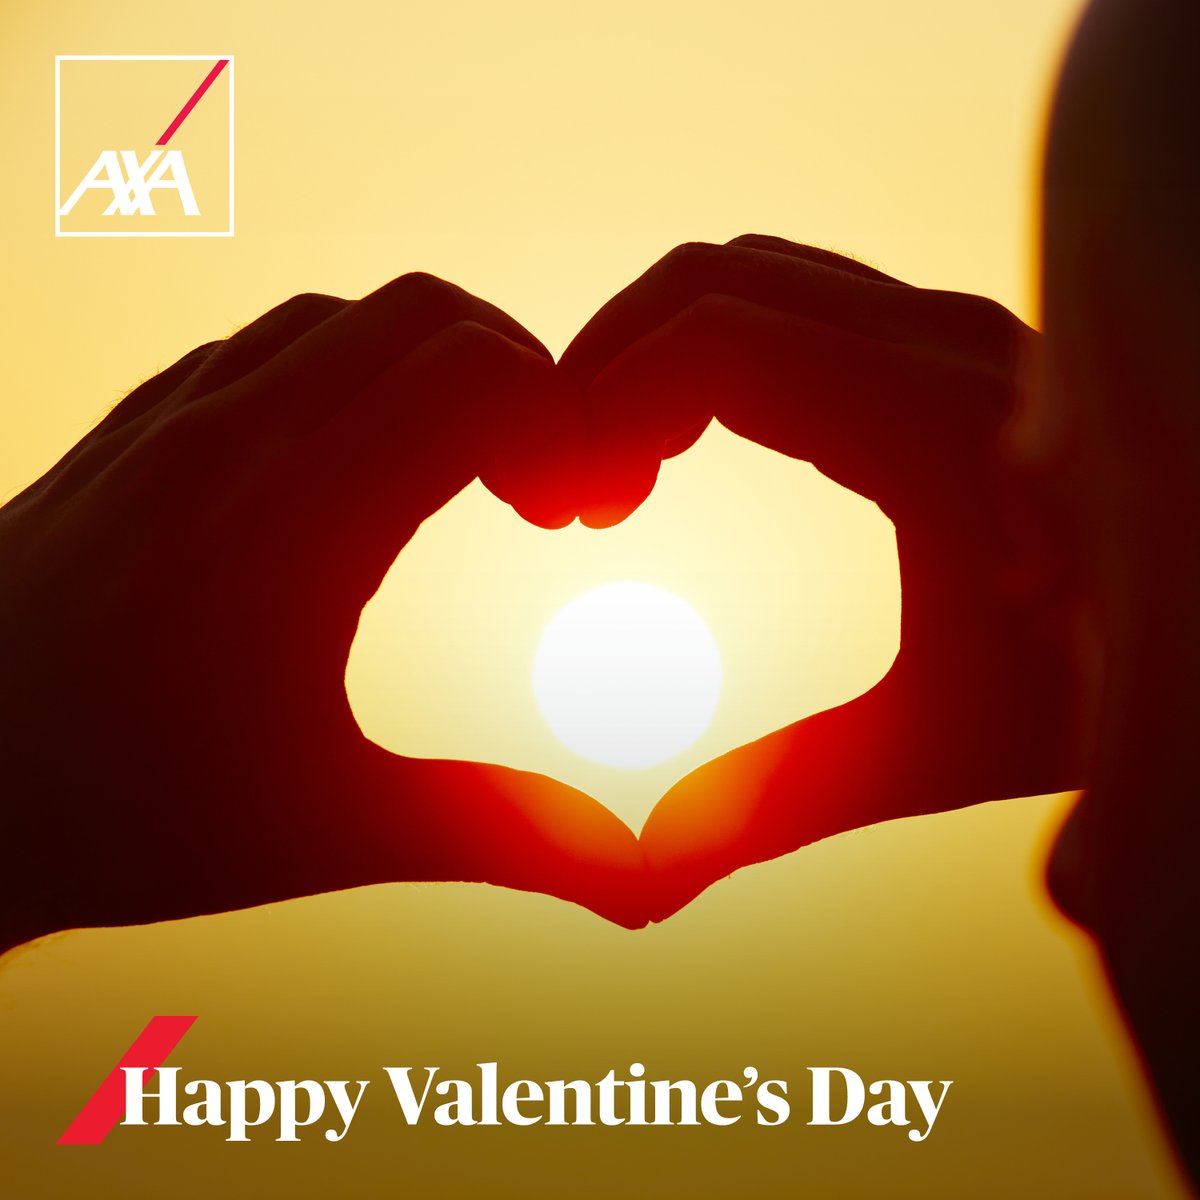 Today is Valentine's day - a great reason for letting the people closest to you know how much you love and appreciate them. Happy Valentine's Day #KnowYouCan #ShareTheLove